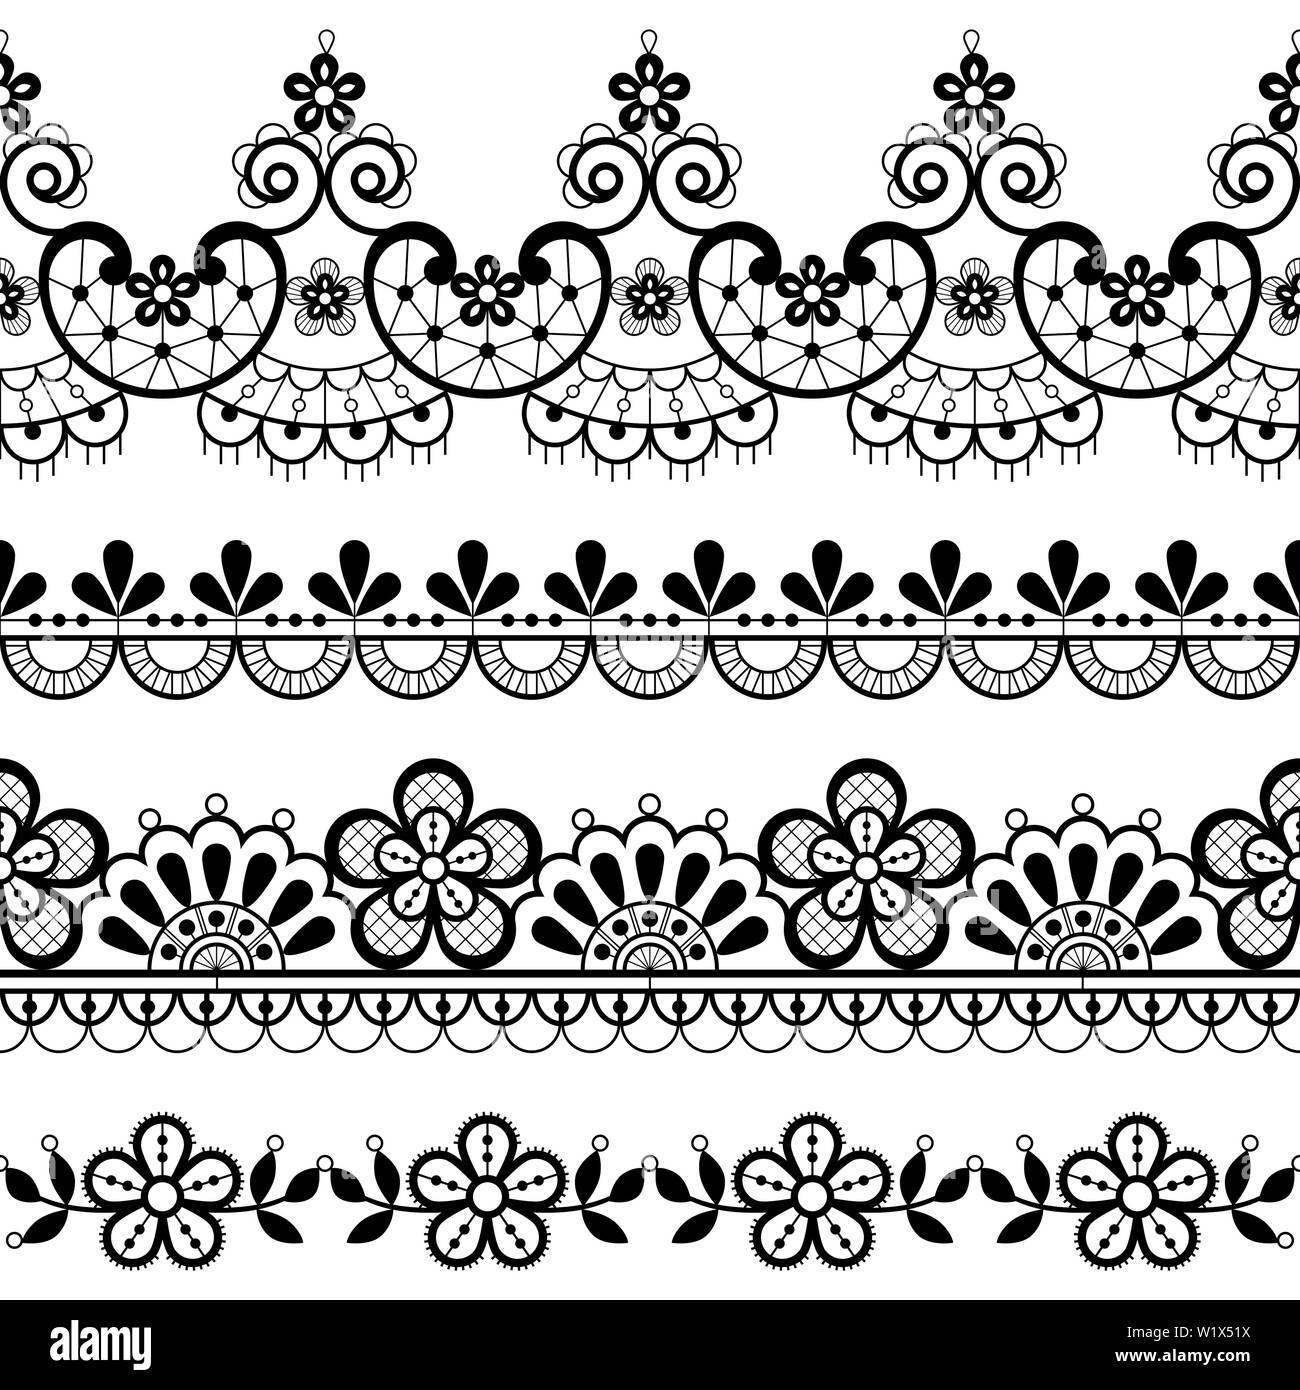 Vintage lace seamless vector pattern, ornamental repetitive design with flowers and swirls in black on white background Stock Vector